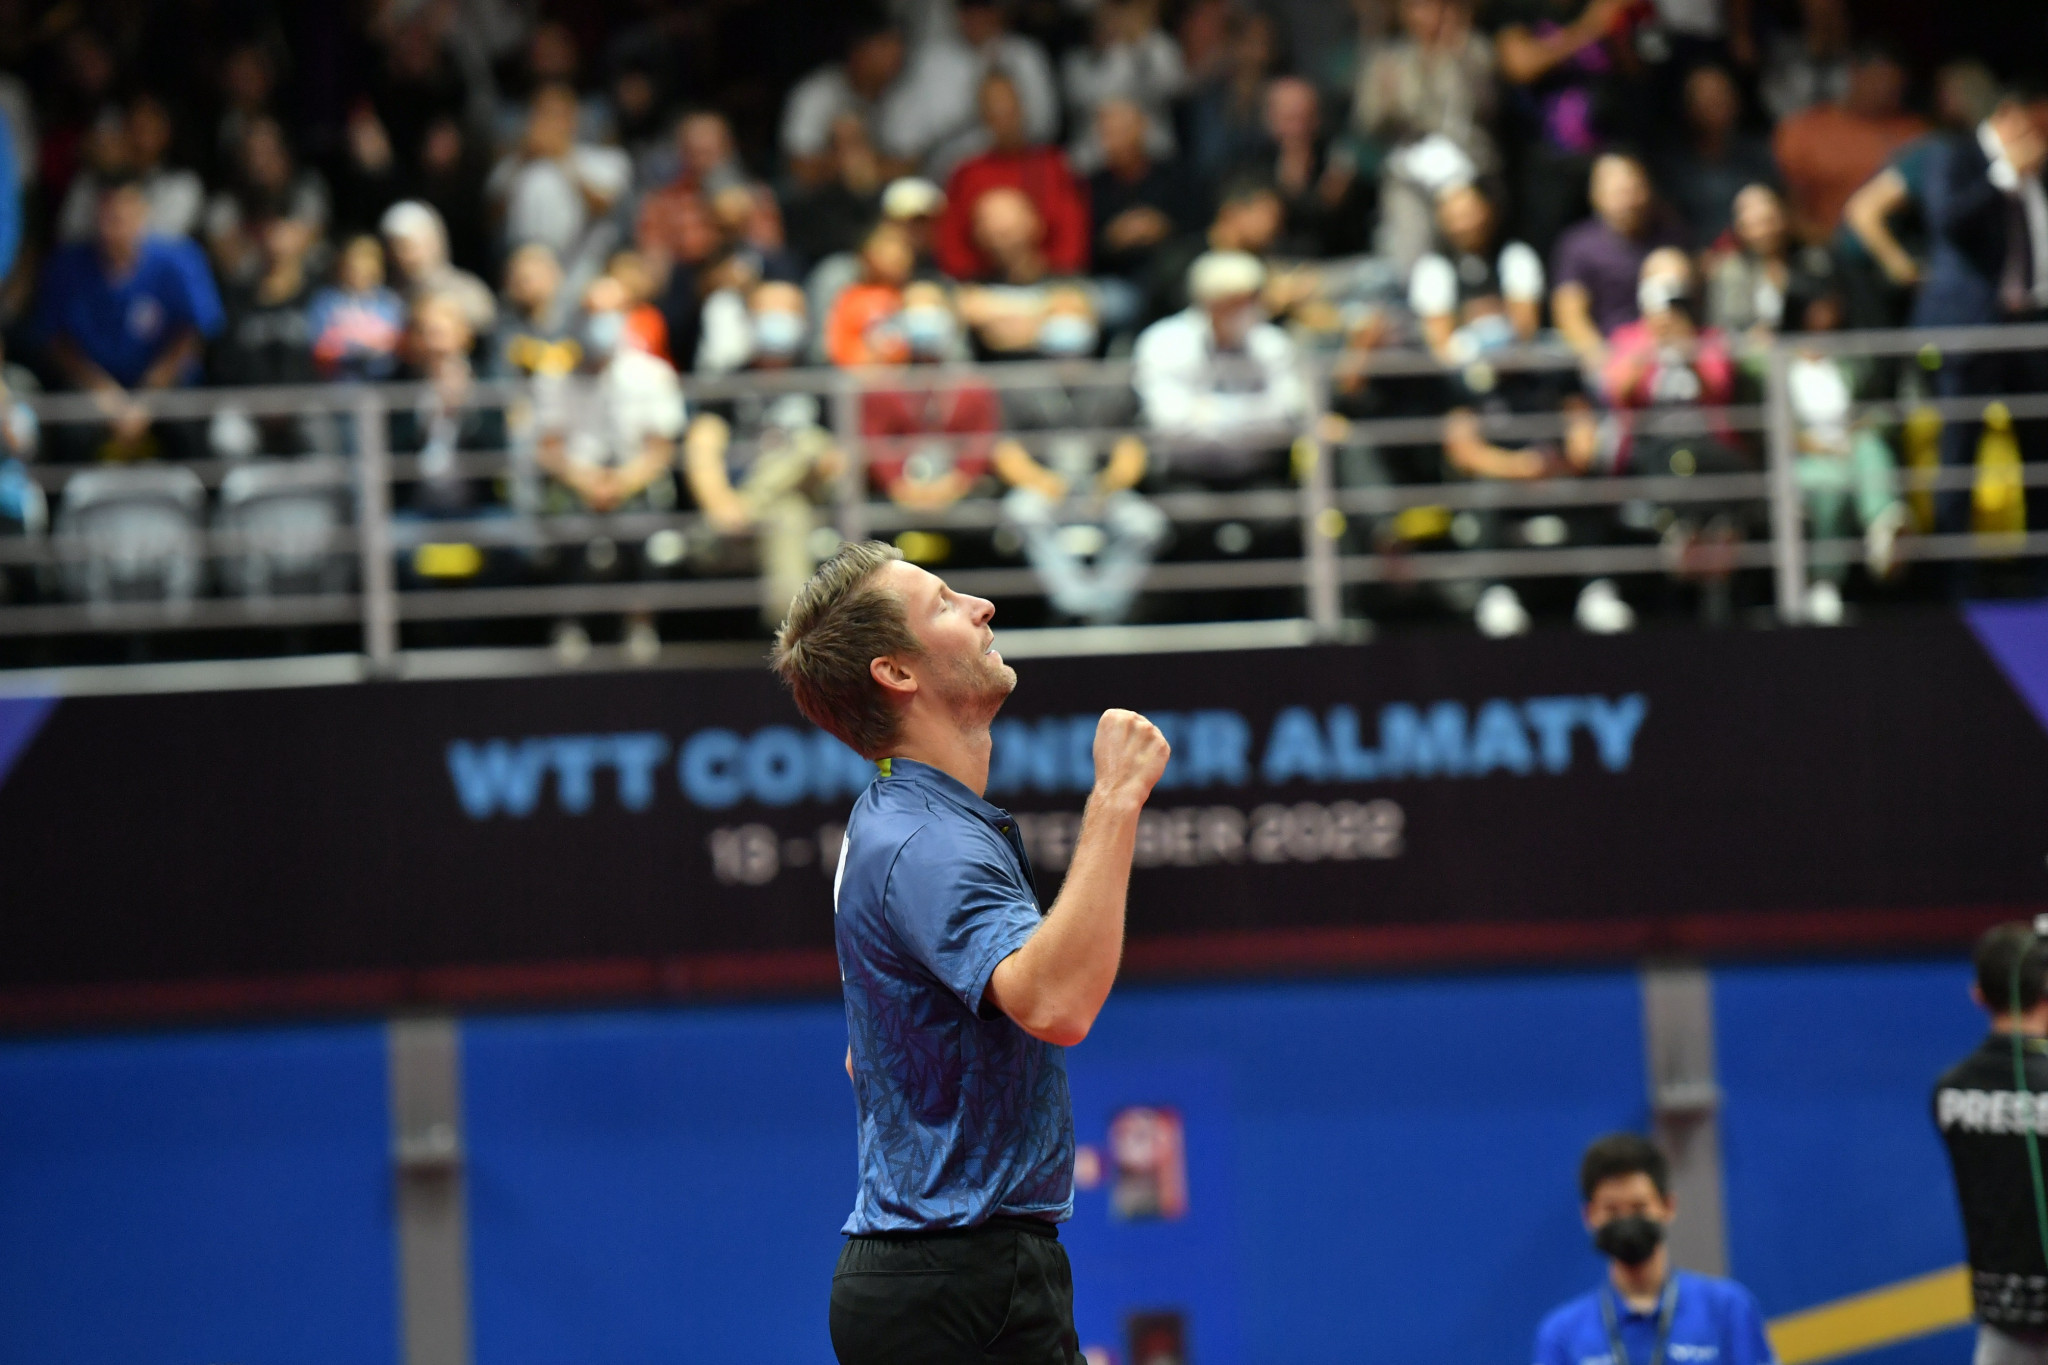 Ruwen Filus came from three games down to win the men's singles gold in Almaty ©WTT